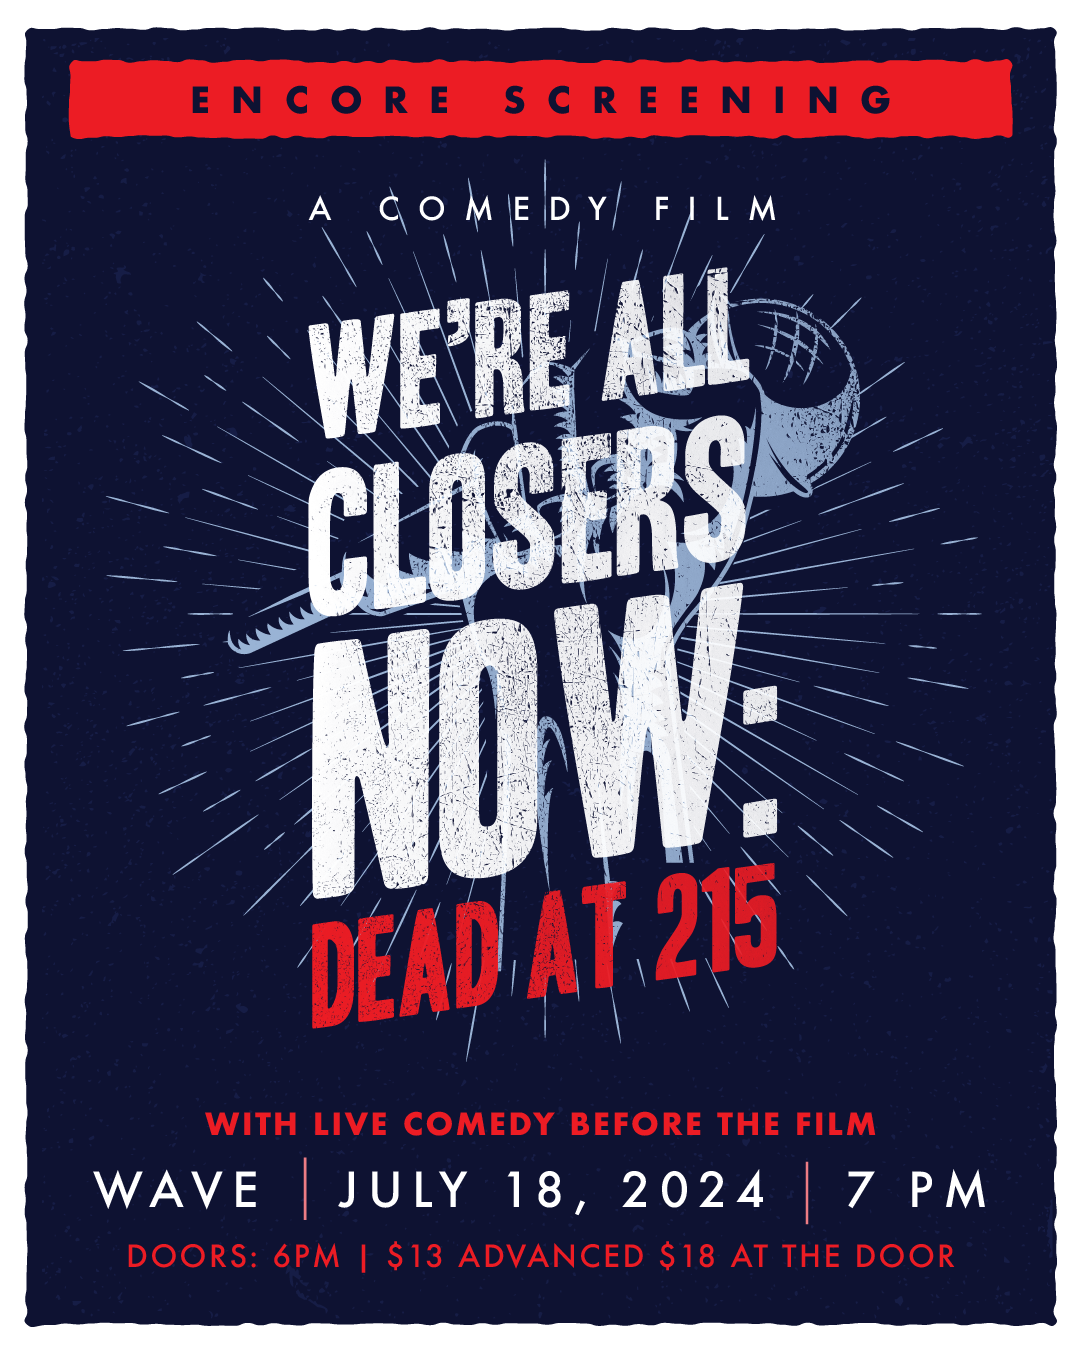 Dead at 215: Documentary and Live Comedic Performances